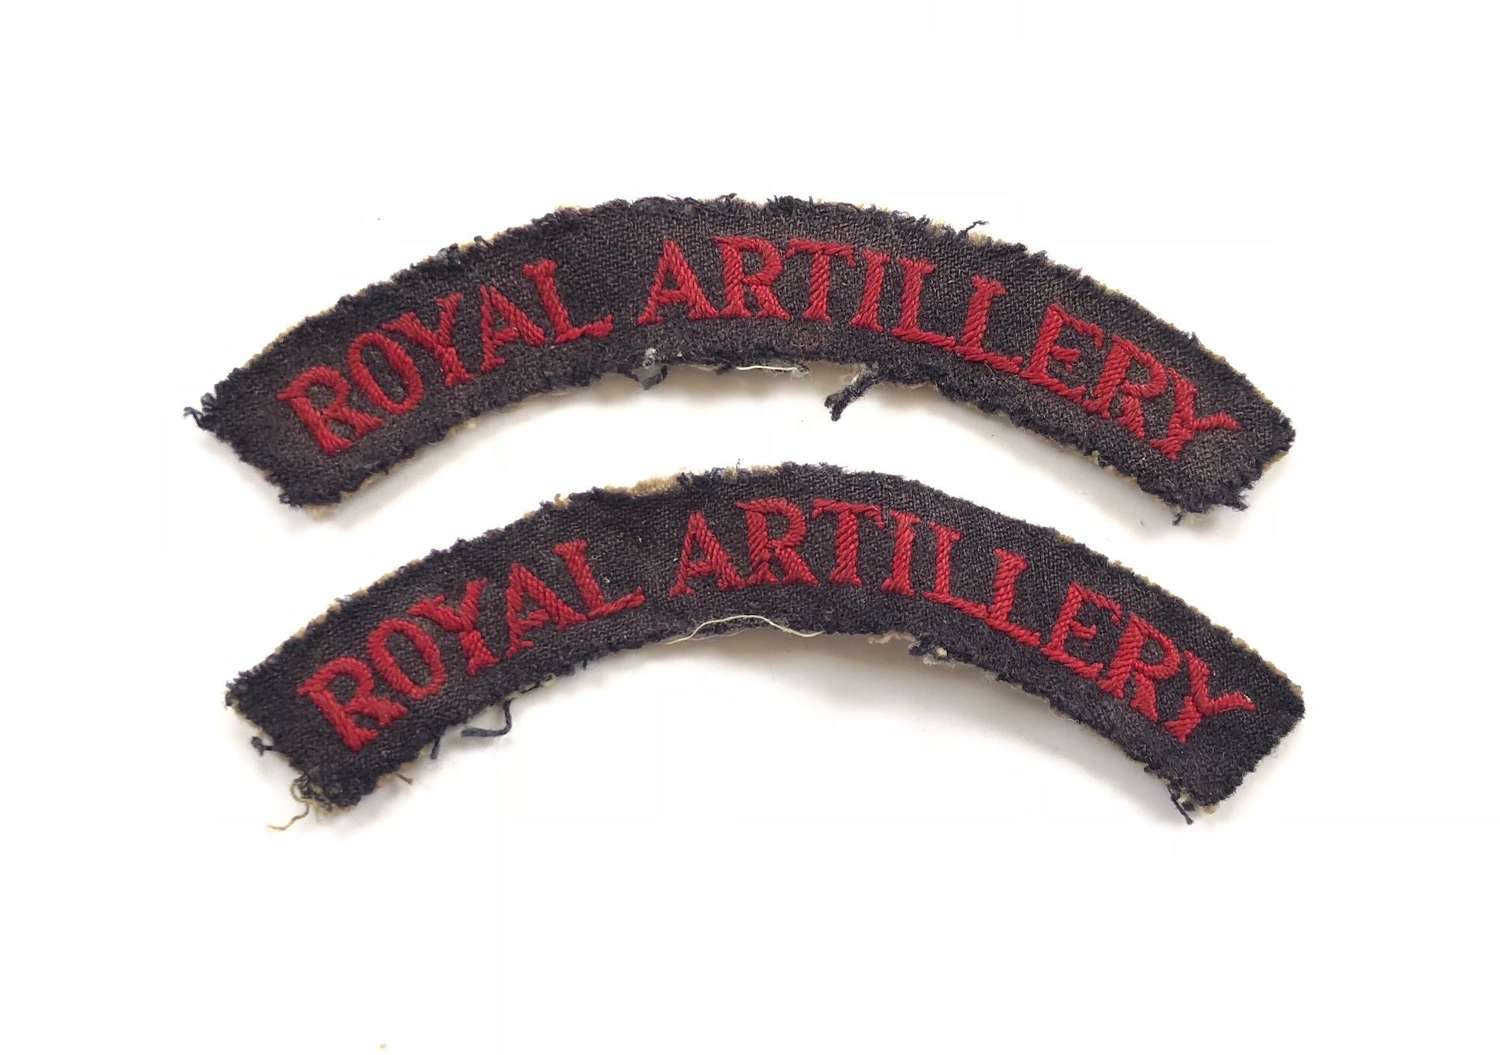 WW2 Period Royal Artillery Embroidered Shoulder Titles.